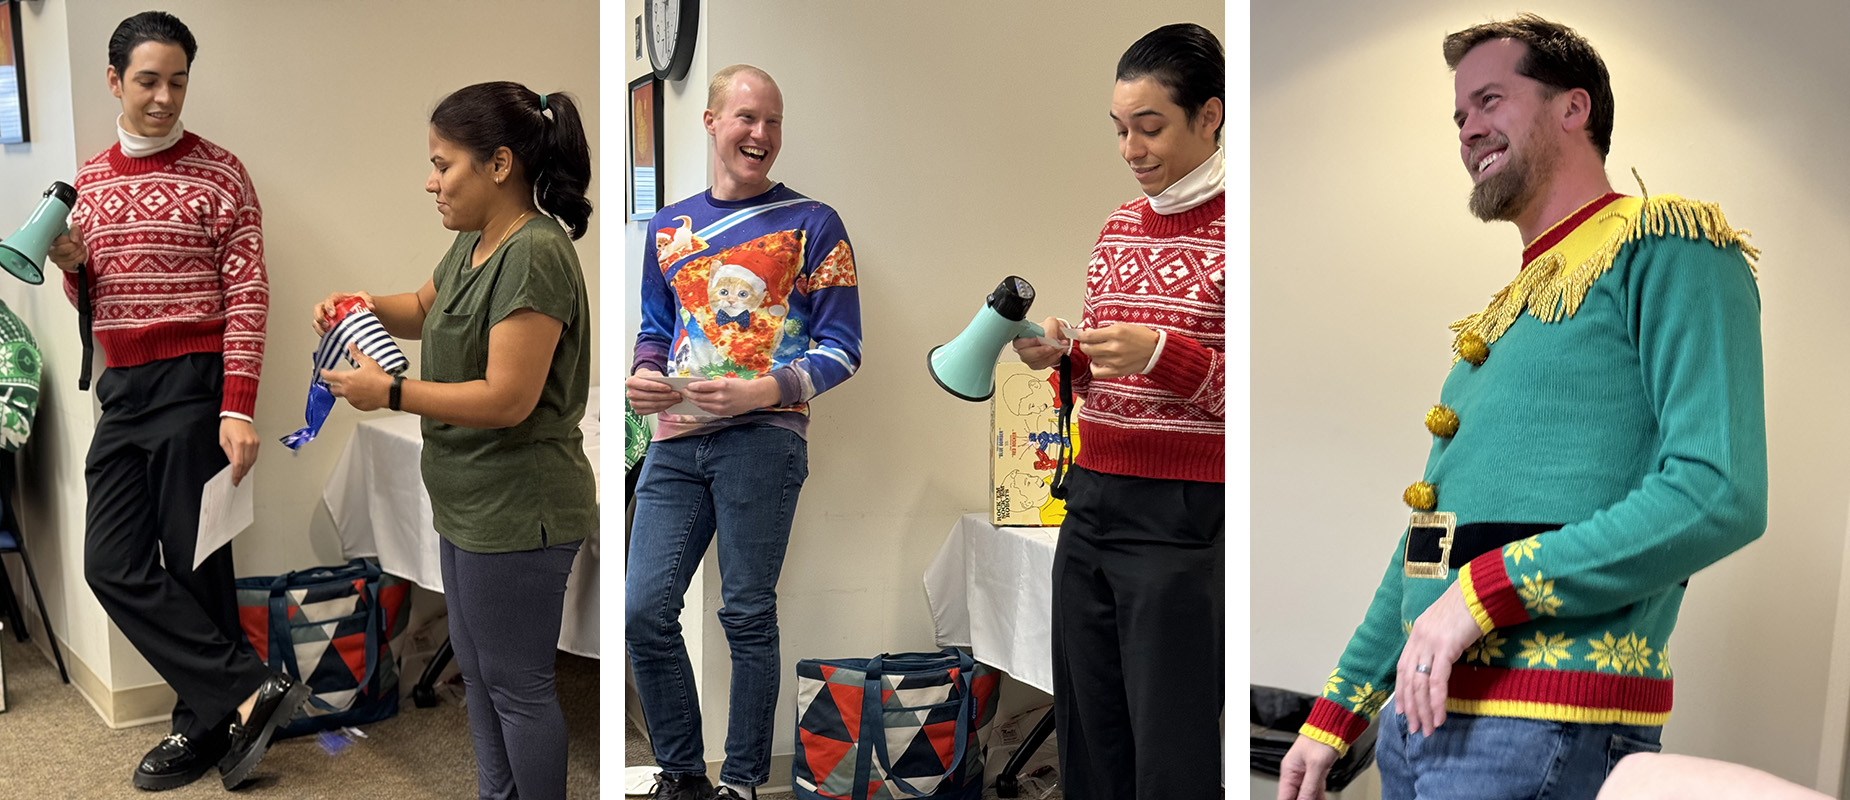 Composite of three images show a person unwrapping a gift with another looking on and holding a megaphone; a person holding a megaphone reading a paper and someone laughing to the side; a person in a holiday sweater smiling.